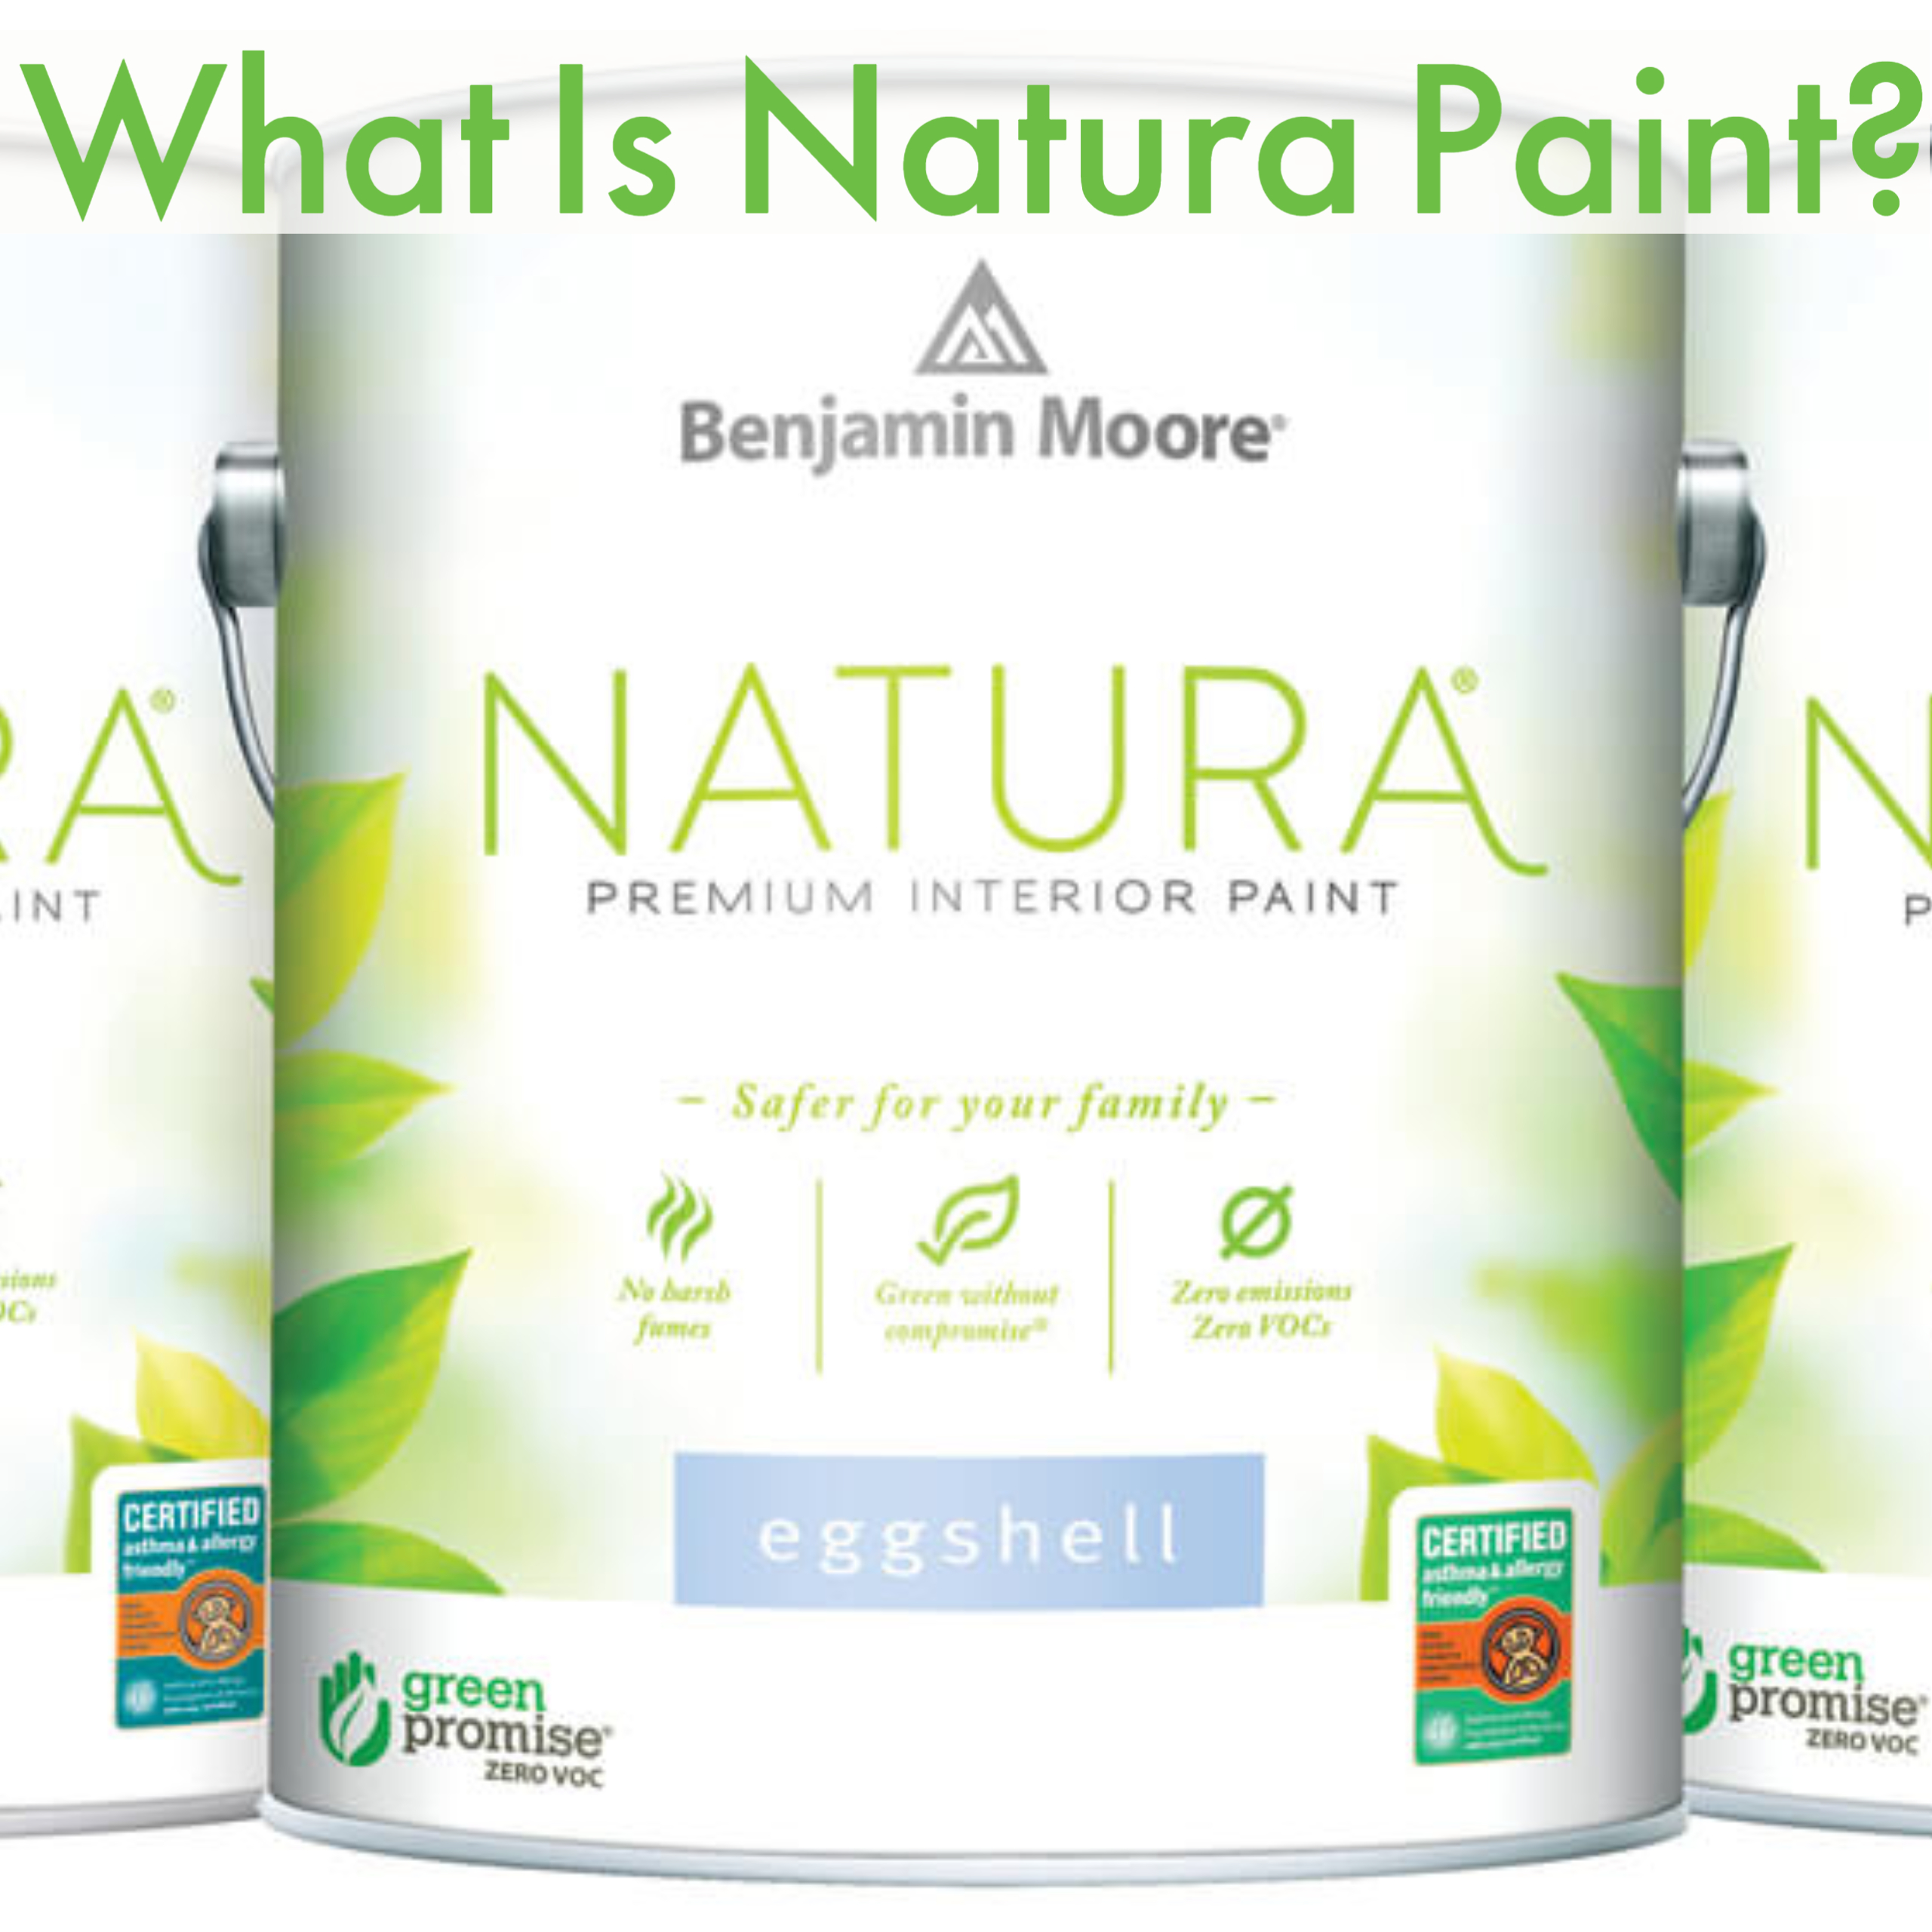 What Is Natura Paint? - Professional Home Painters Toronto